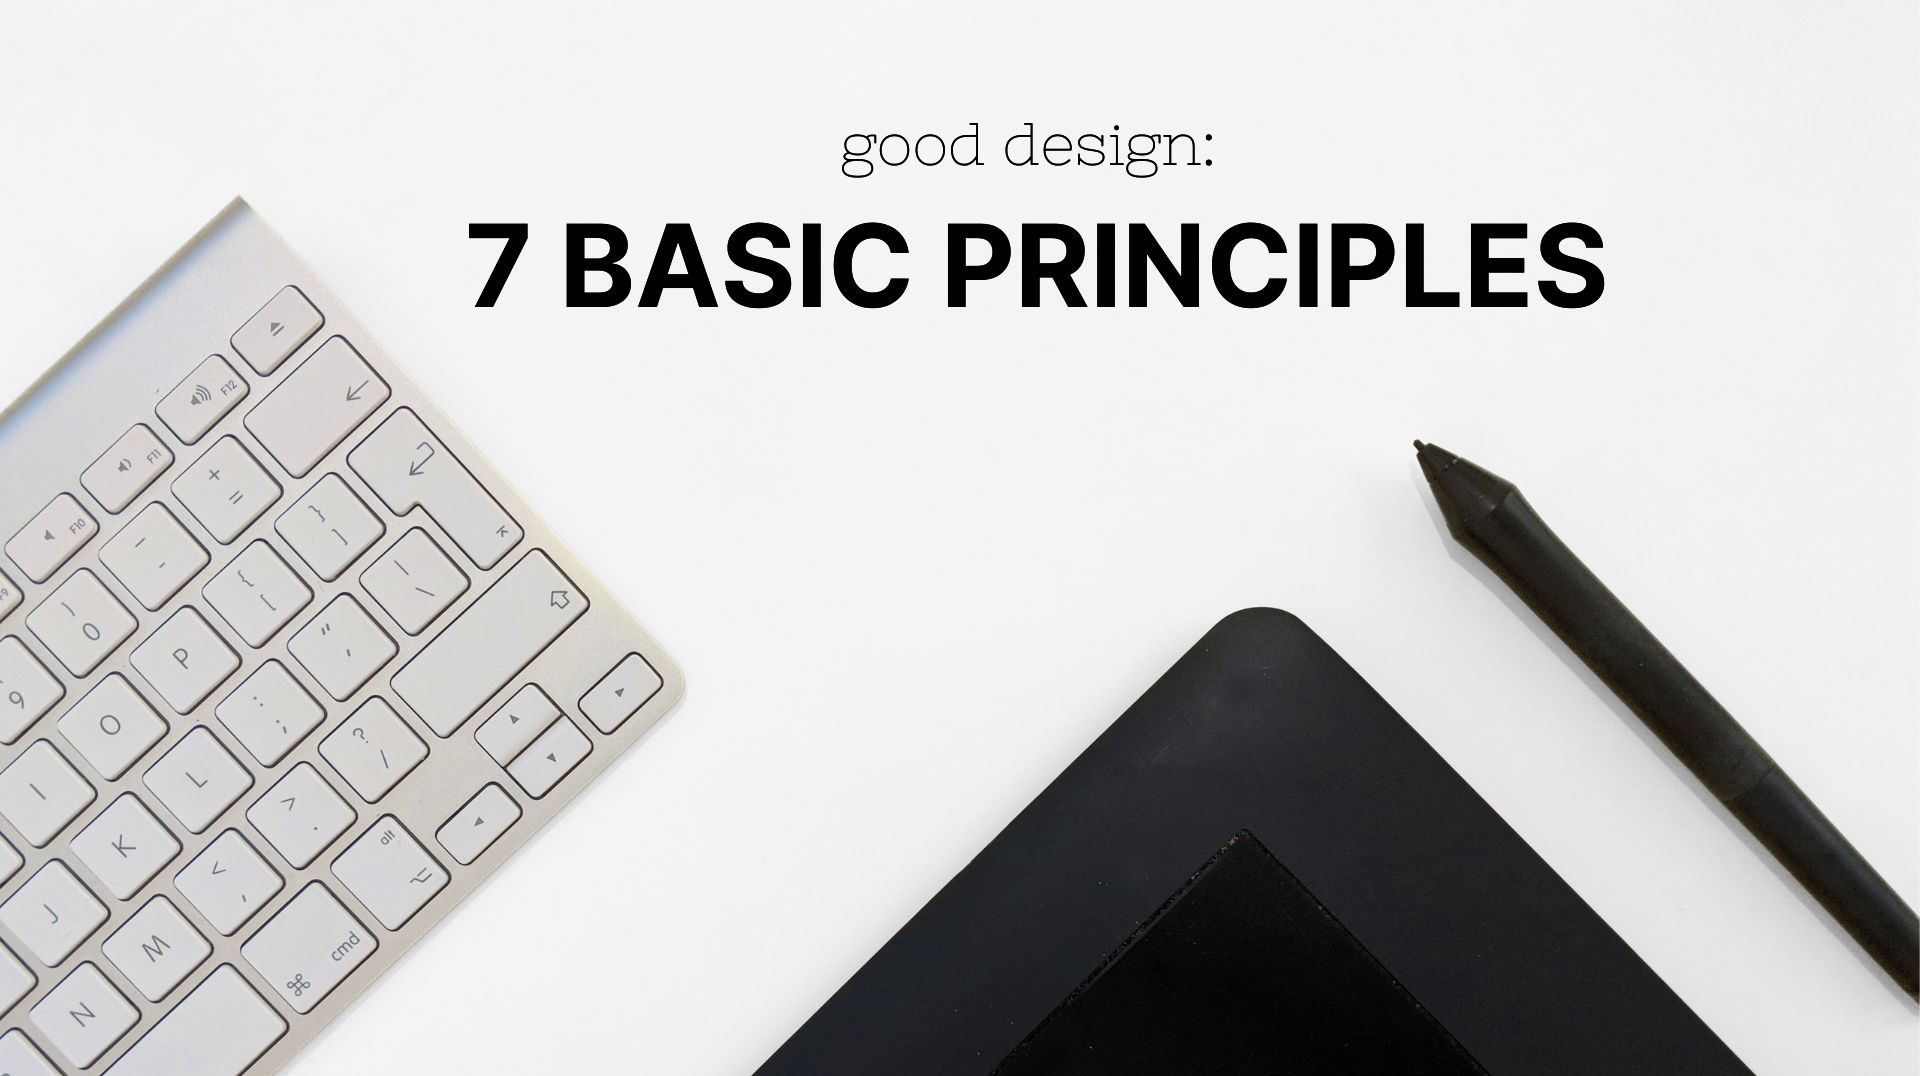 banner to the article on basic principles of a good design